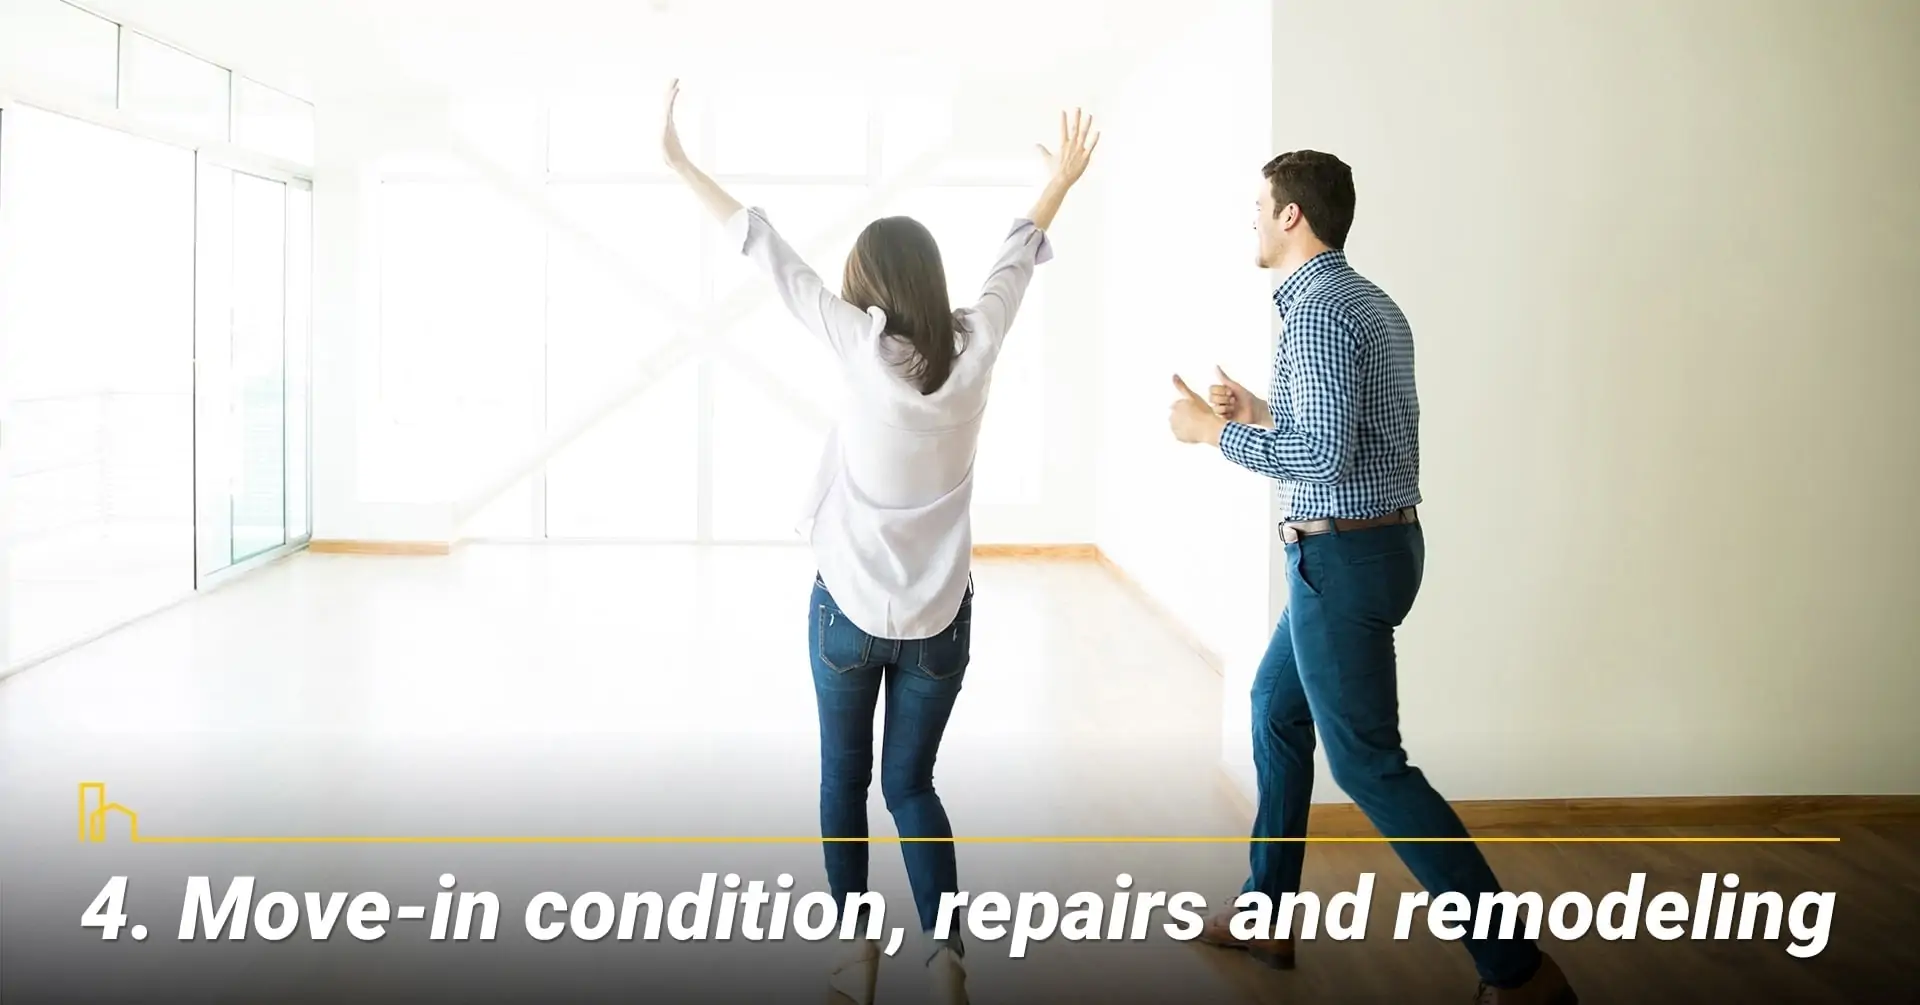 Move-in condition, repairs and remodeling, conditions of the existing home